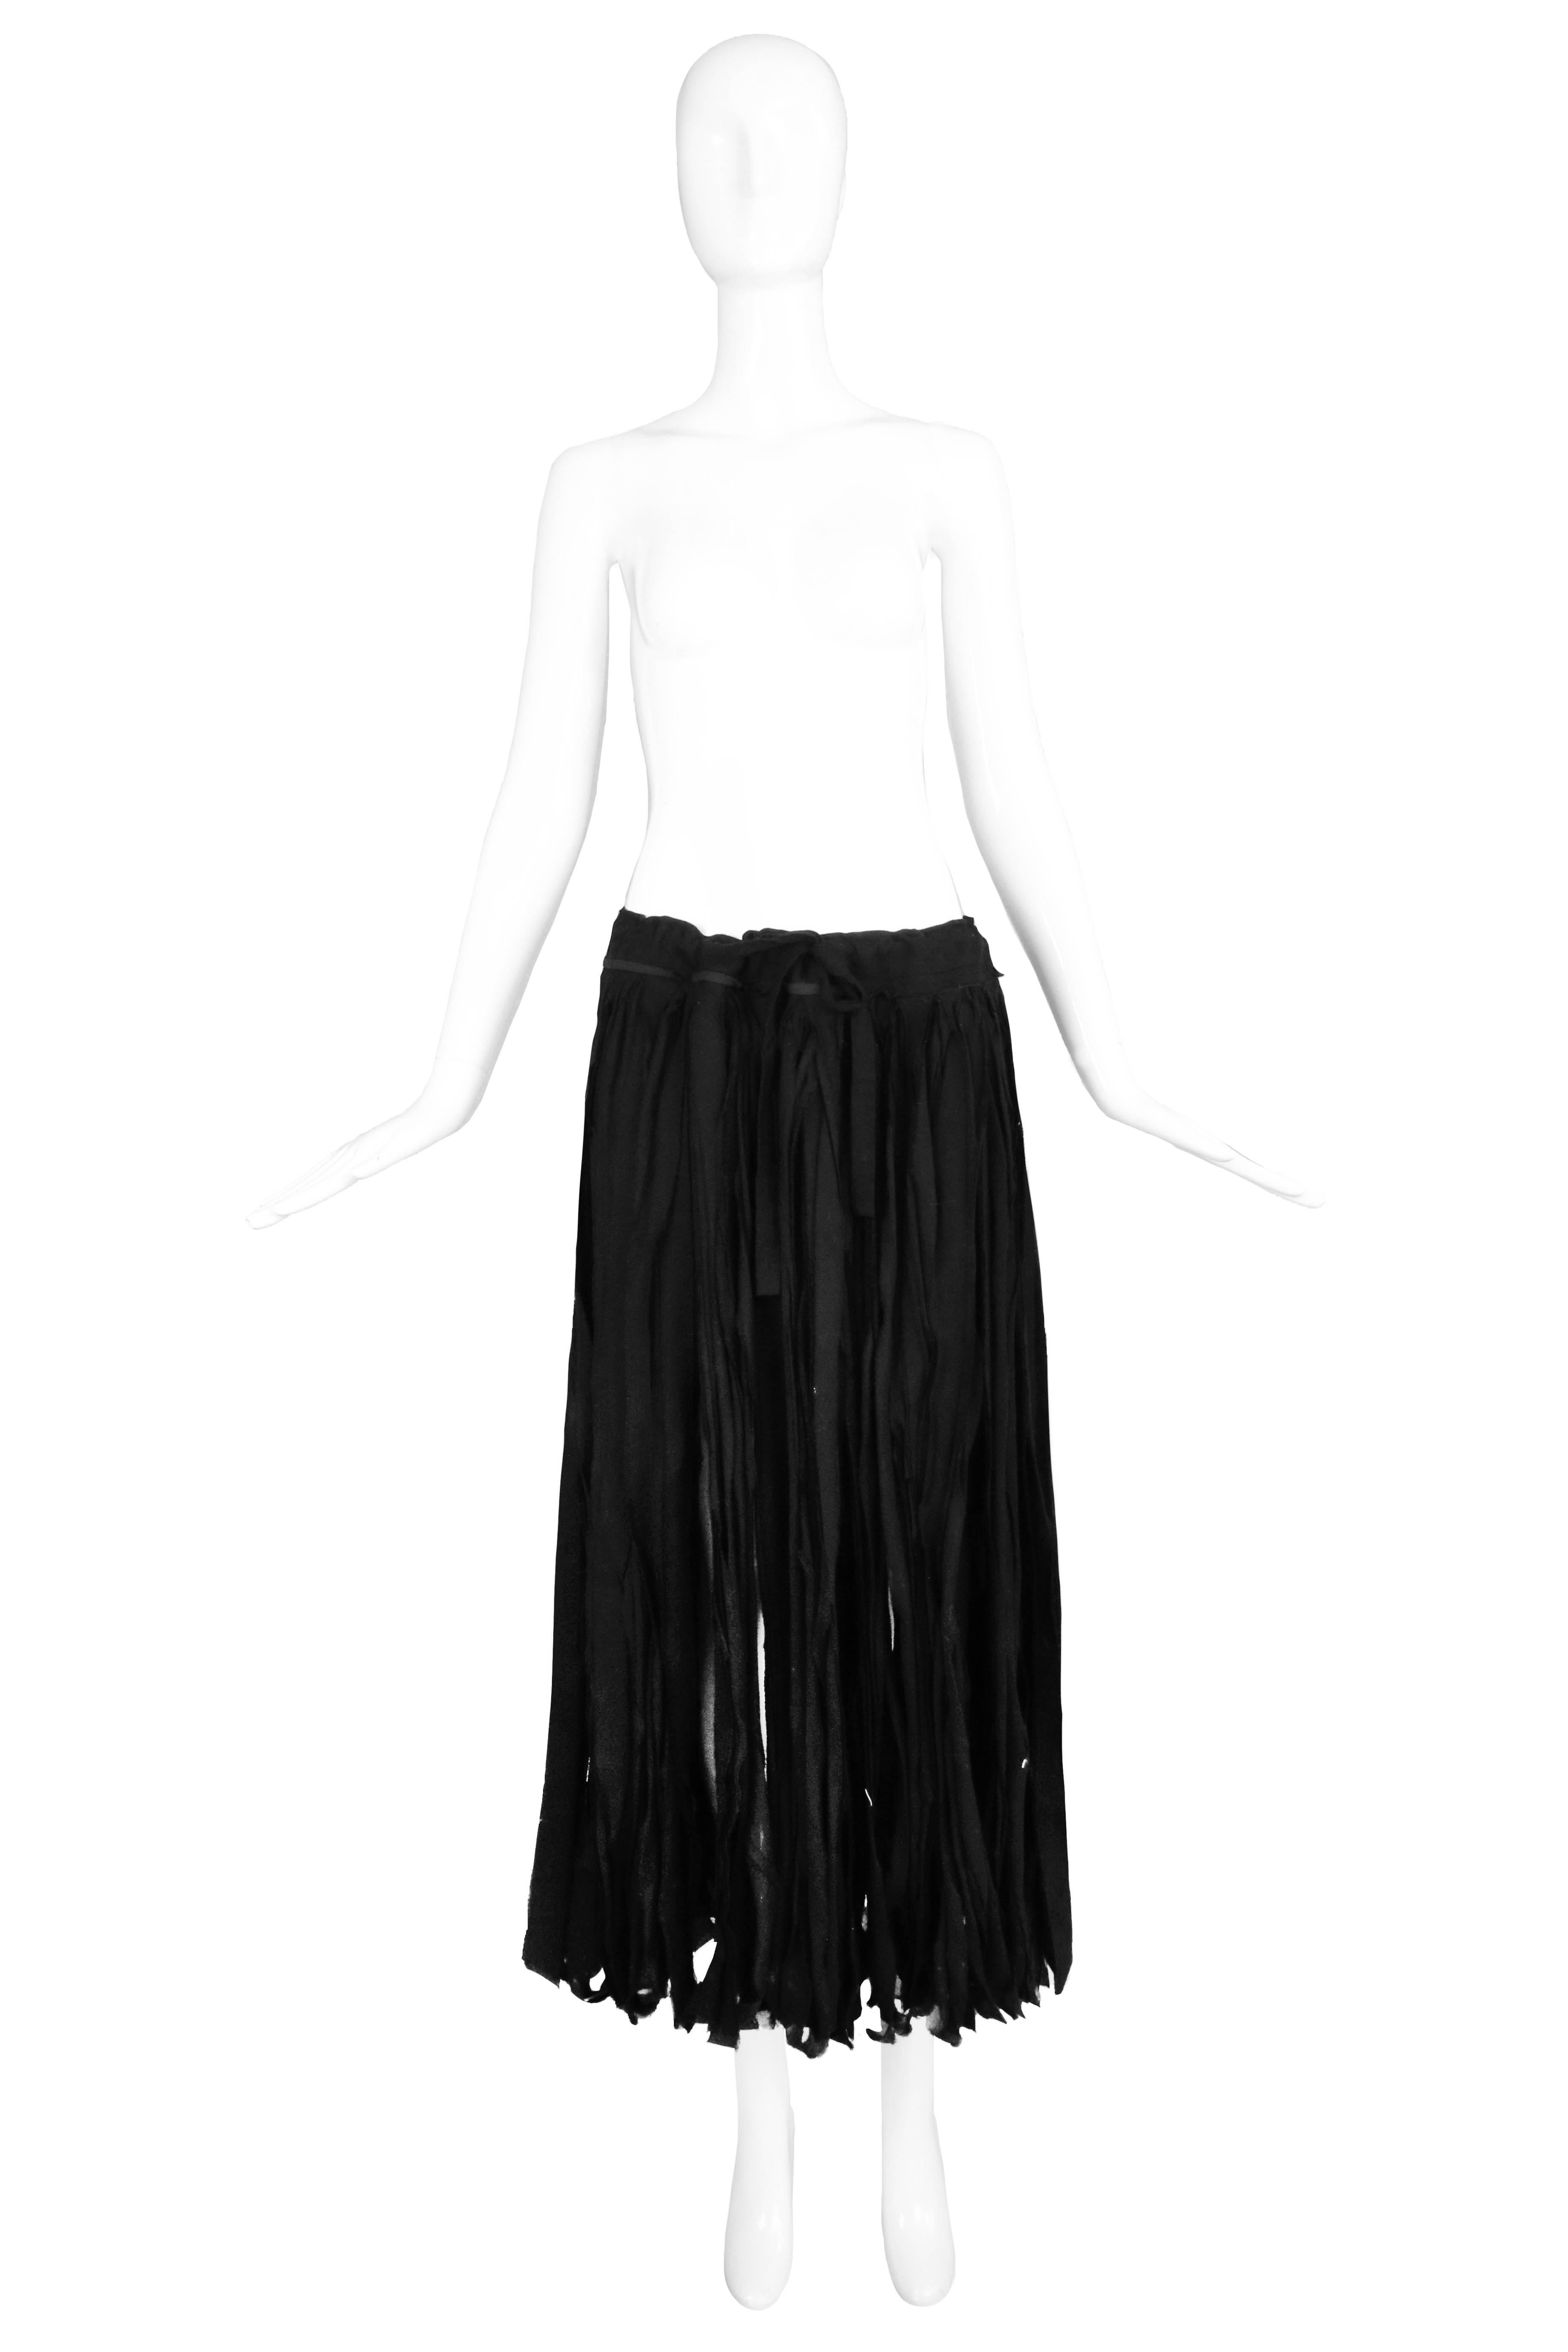 Yohji Yamamoto black 100% cotton carwash skirt with adjustable drawstring waist. In excellent condition. Size tag 2 but because of the waist design, will fit multiple sizes.
MEASUREMENTS:
Waist - 30